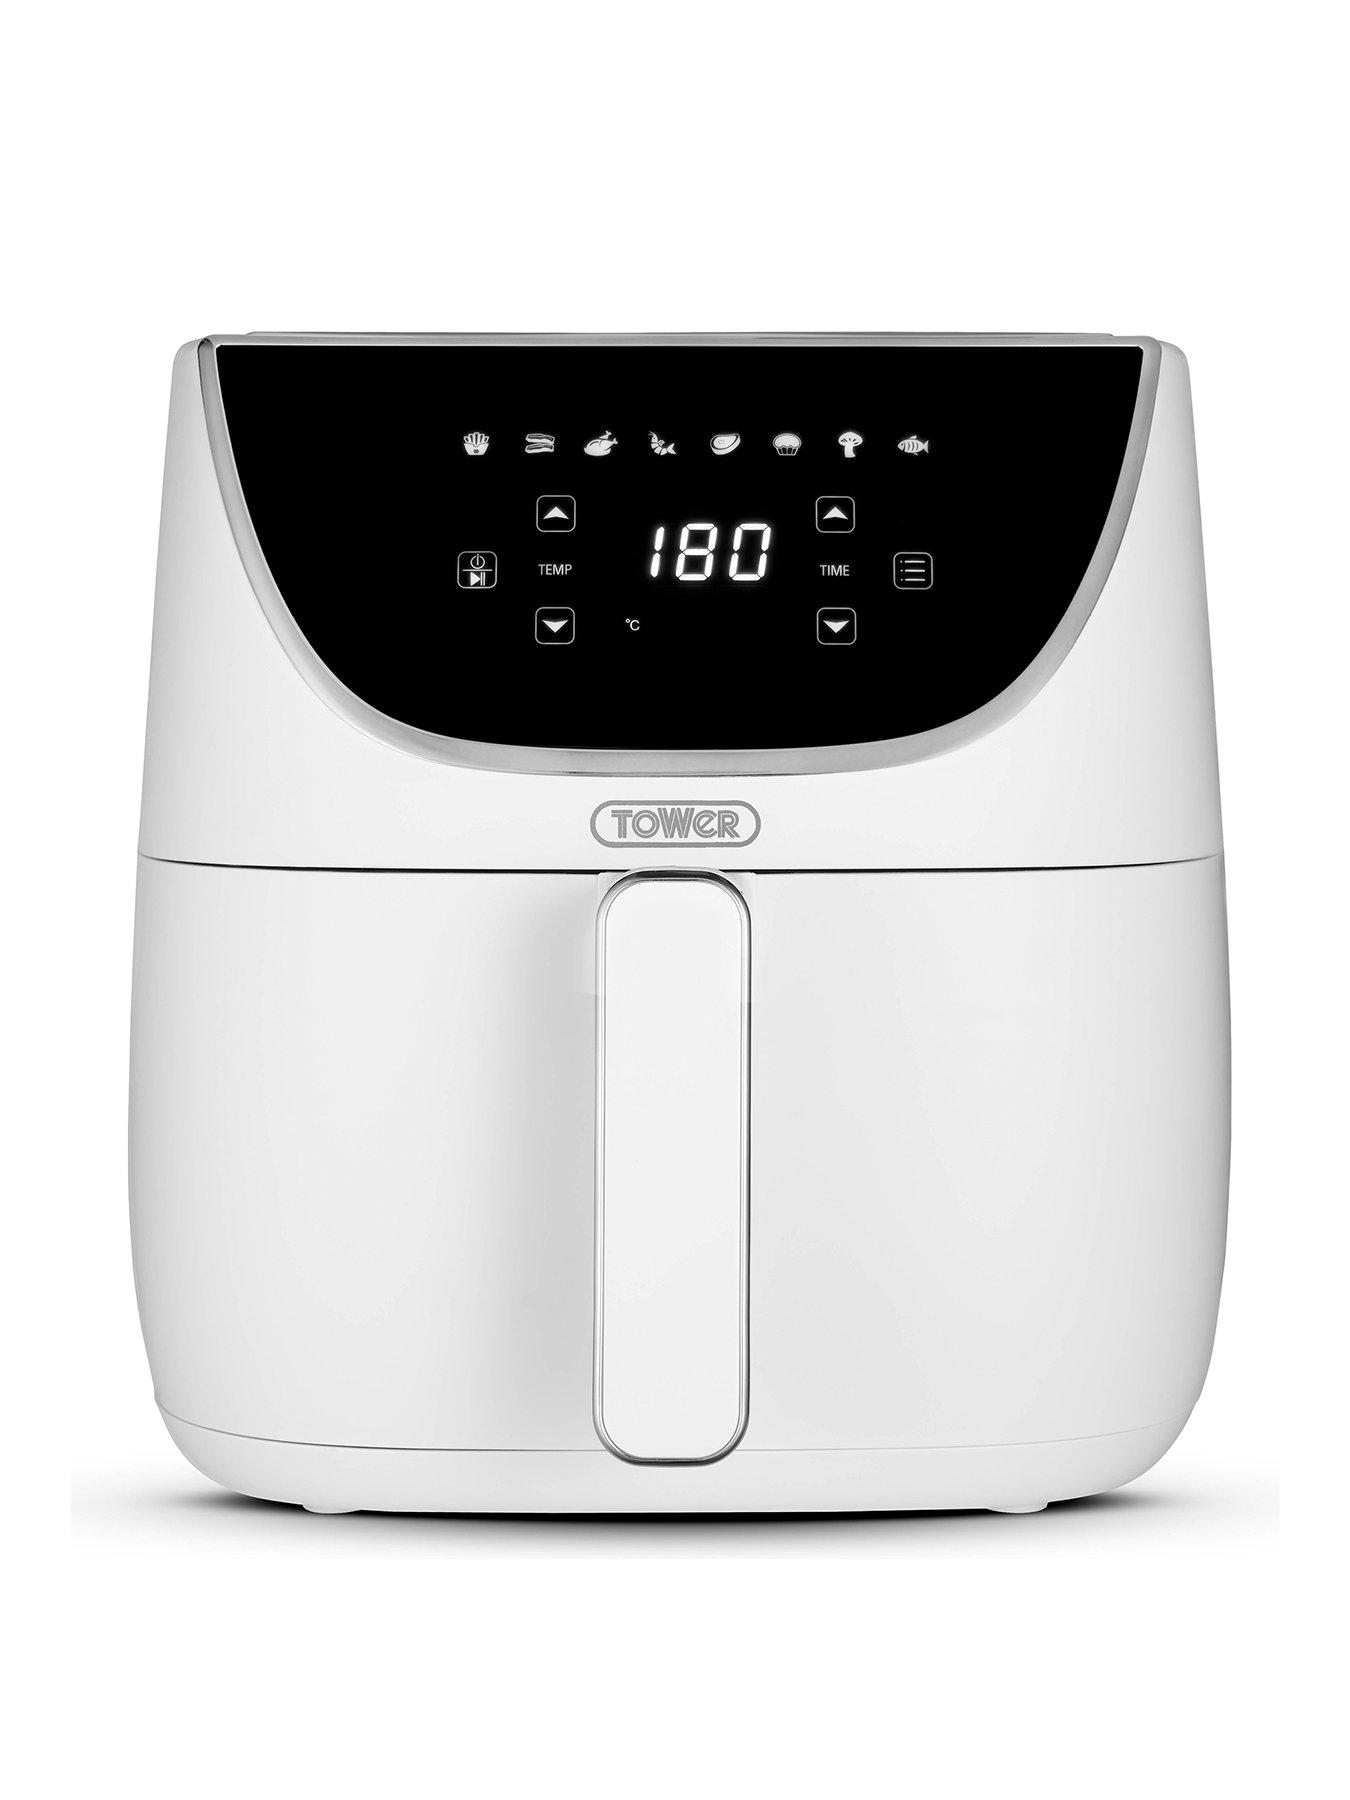 Tower T17127Wht, Vortx Air Fryer With Digital Control Panel, 1700W, 6L, White